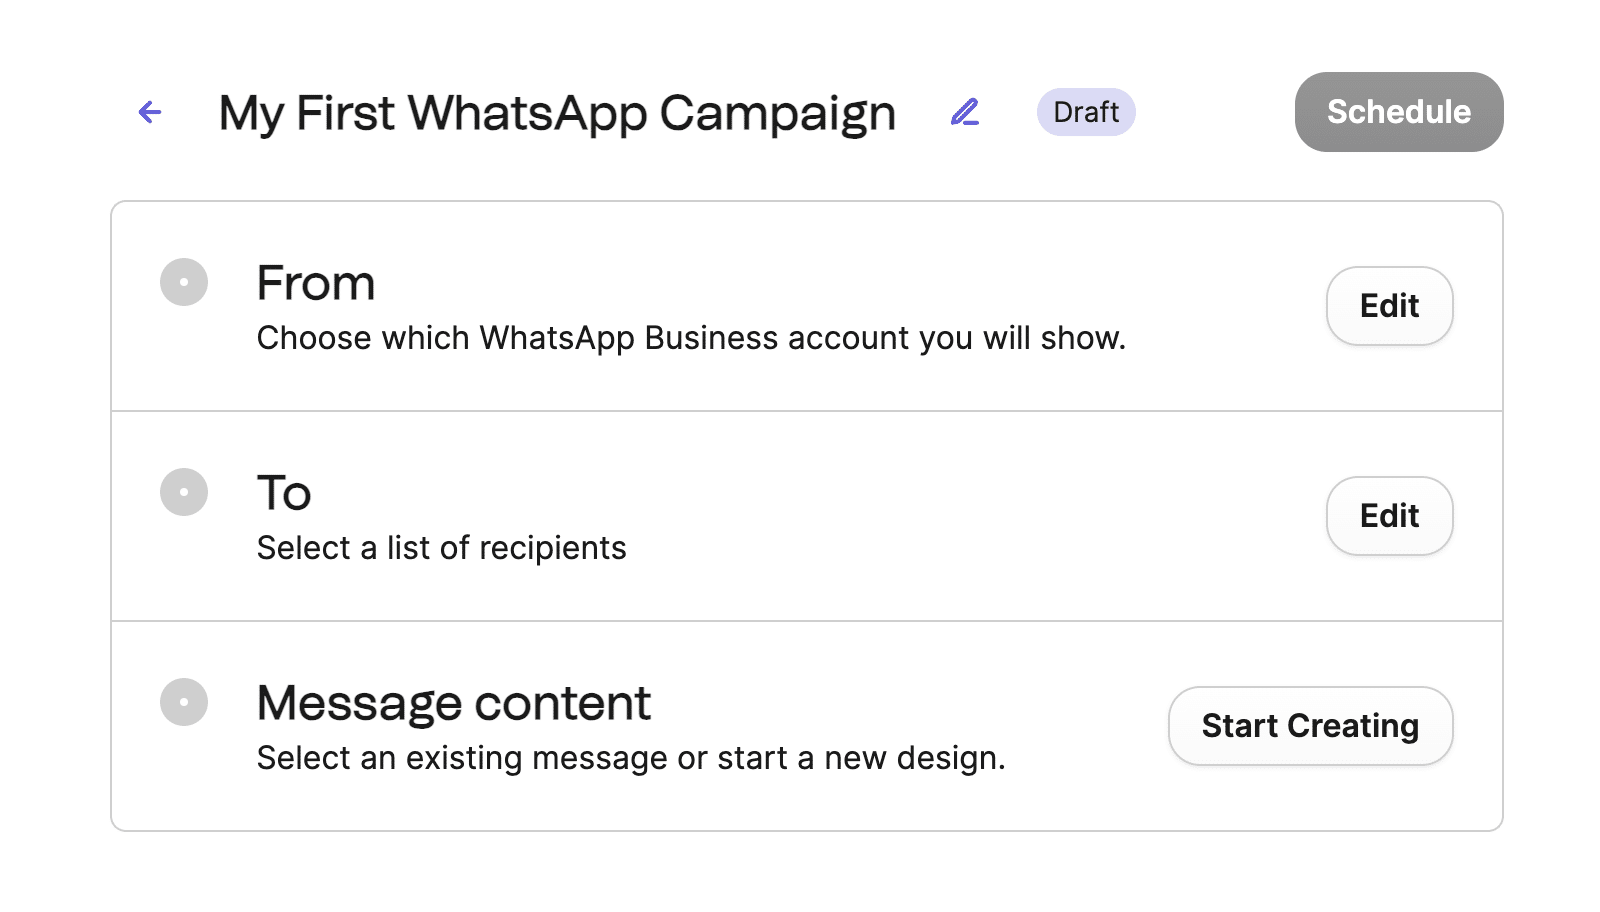 Creating a WhatsApp campaign with Brevo